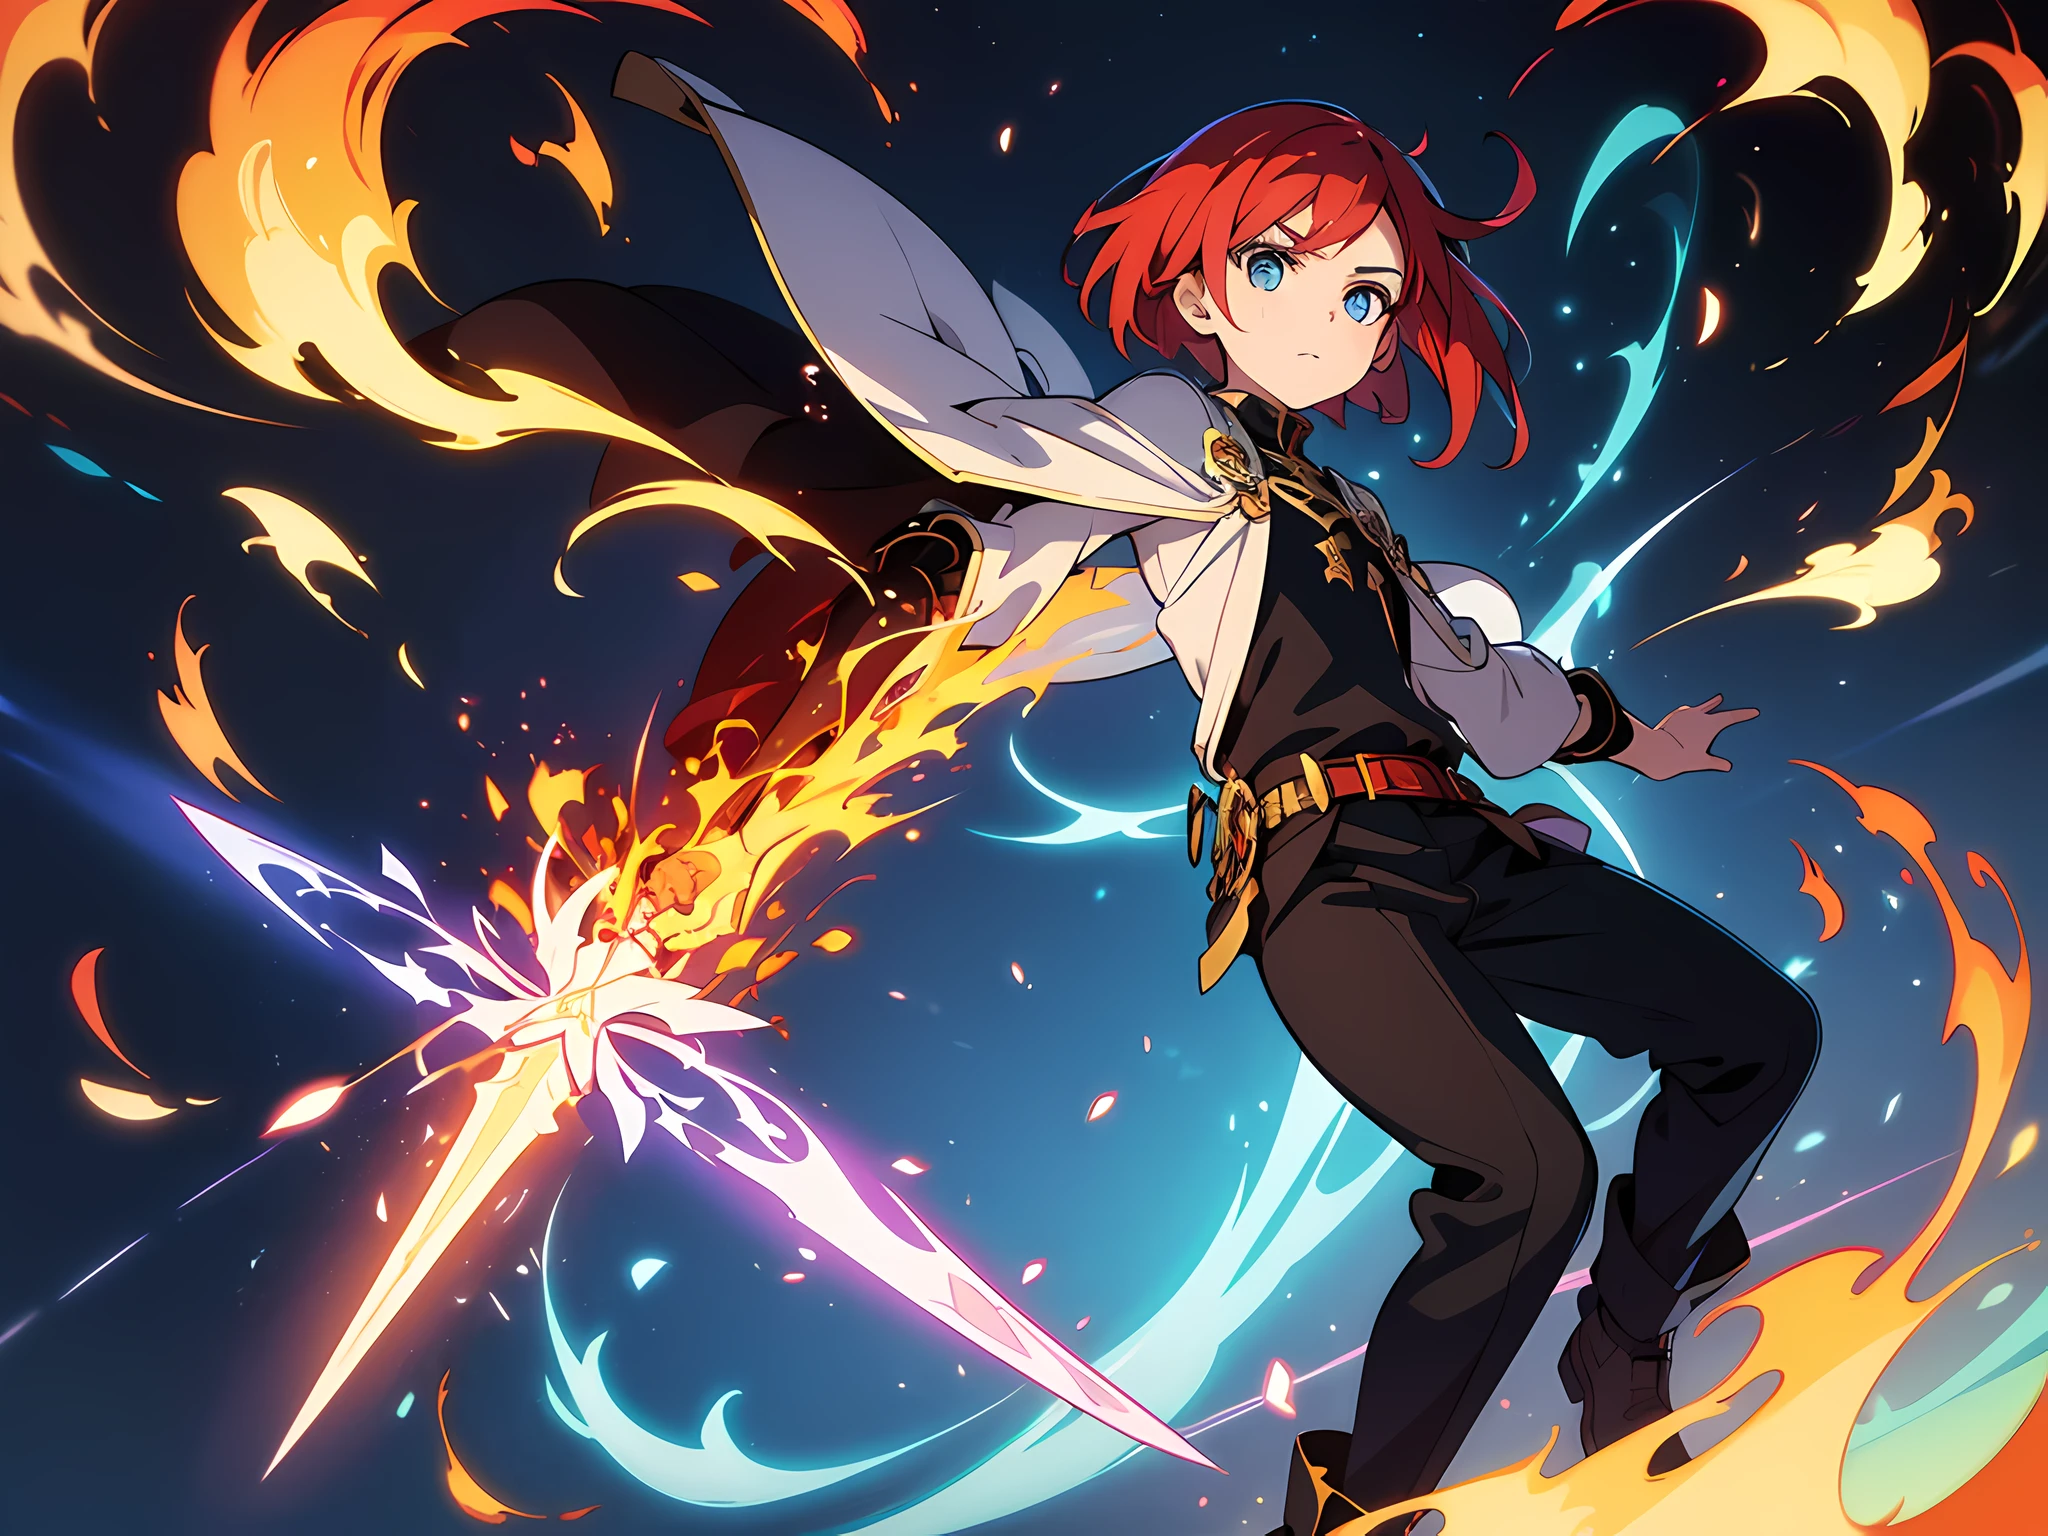 masterpiece, In a world where magic and technology exist side by side, a young man (red hair, short hair) sets out on a journey to hone their skills and uncover the secrets of their powers, beautiful eyes finely detailed. The mage must learn to harness the full potential of their abilities and unlock the true potential of magic in the modern age. full body illustration, evil facial expression, holding a sword, he hold sword with flames coming out from his sword.